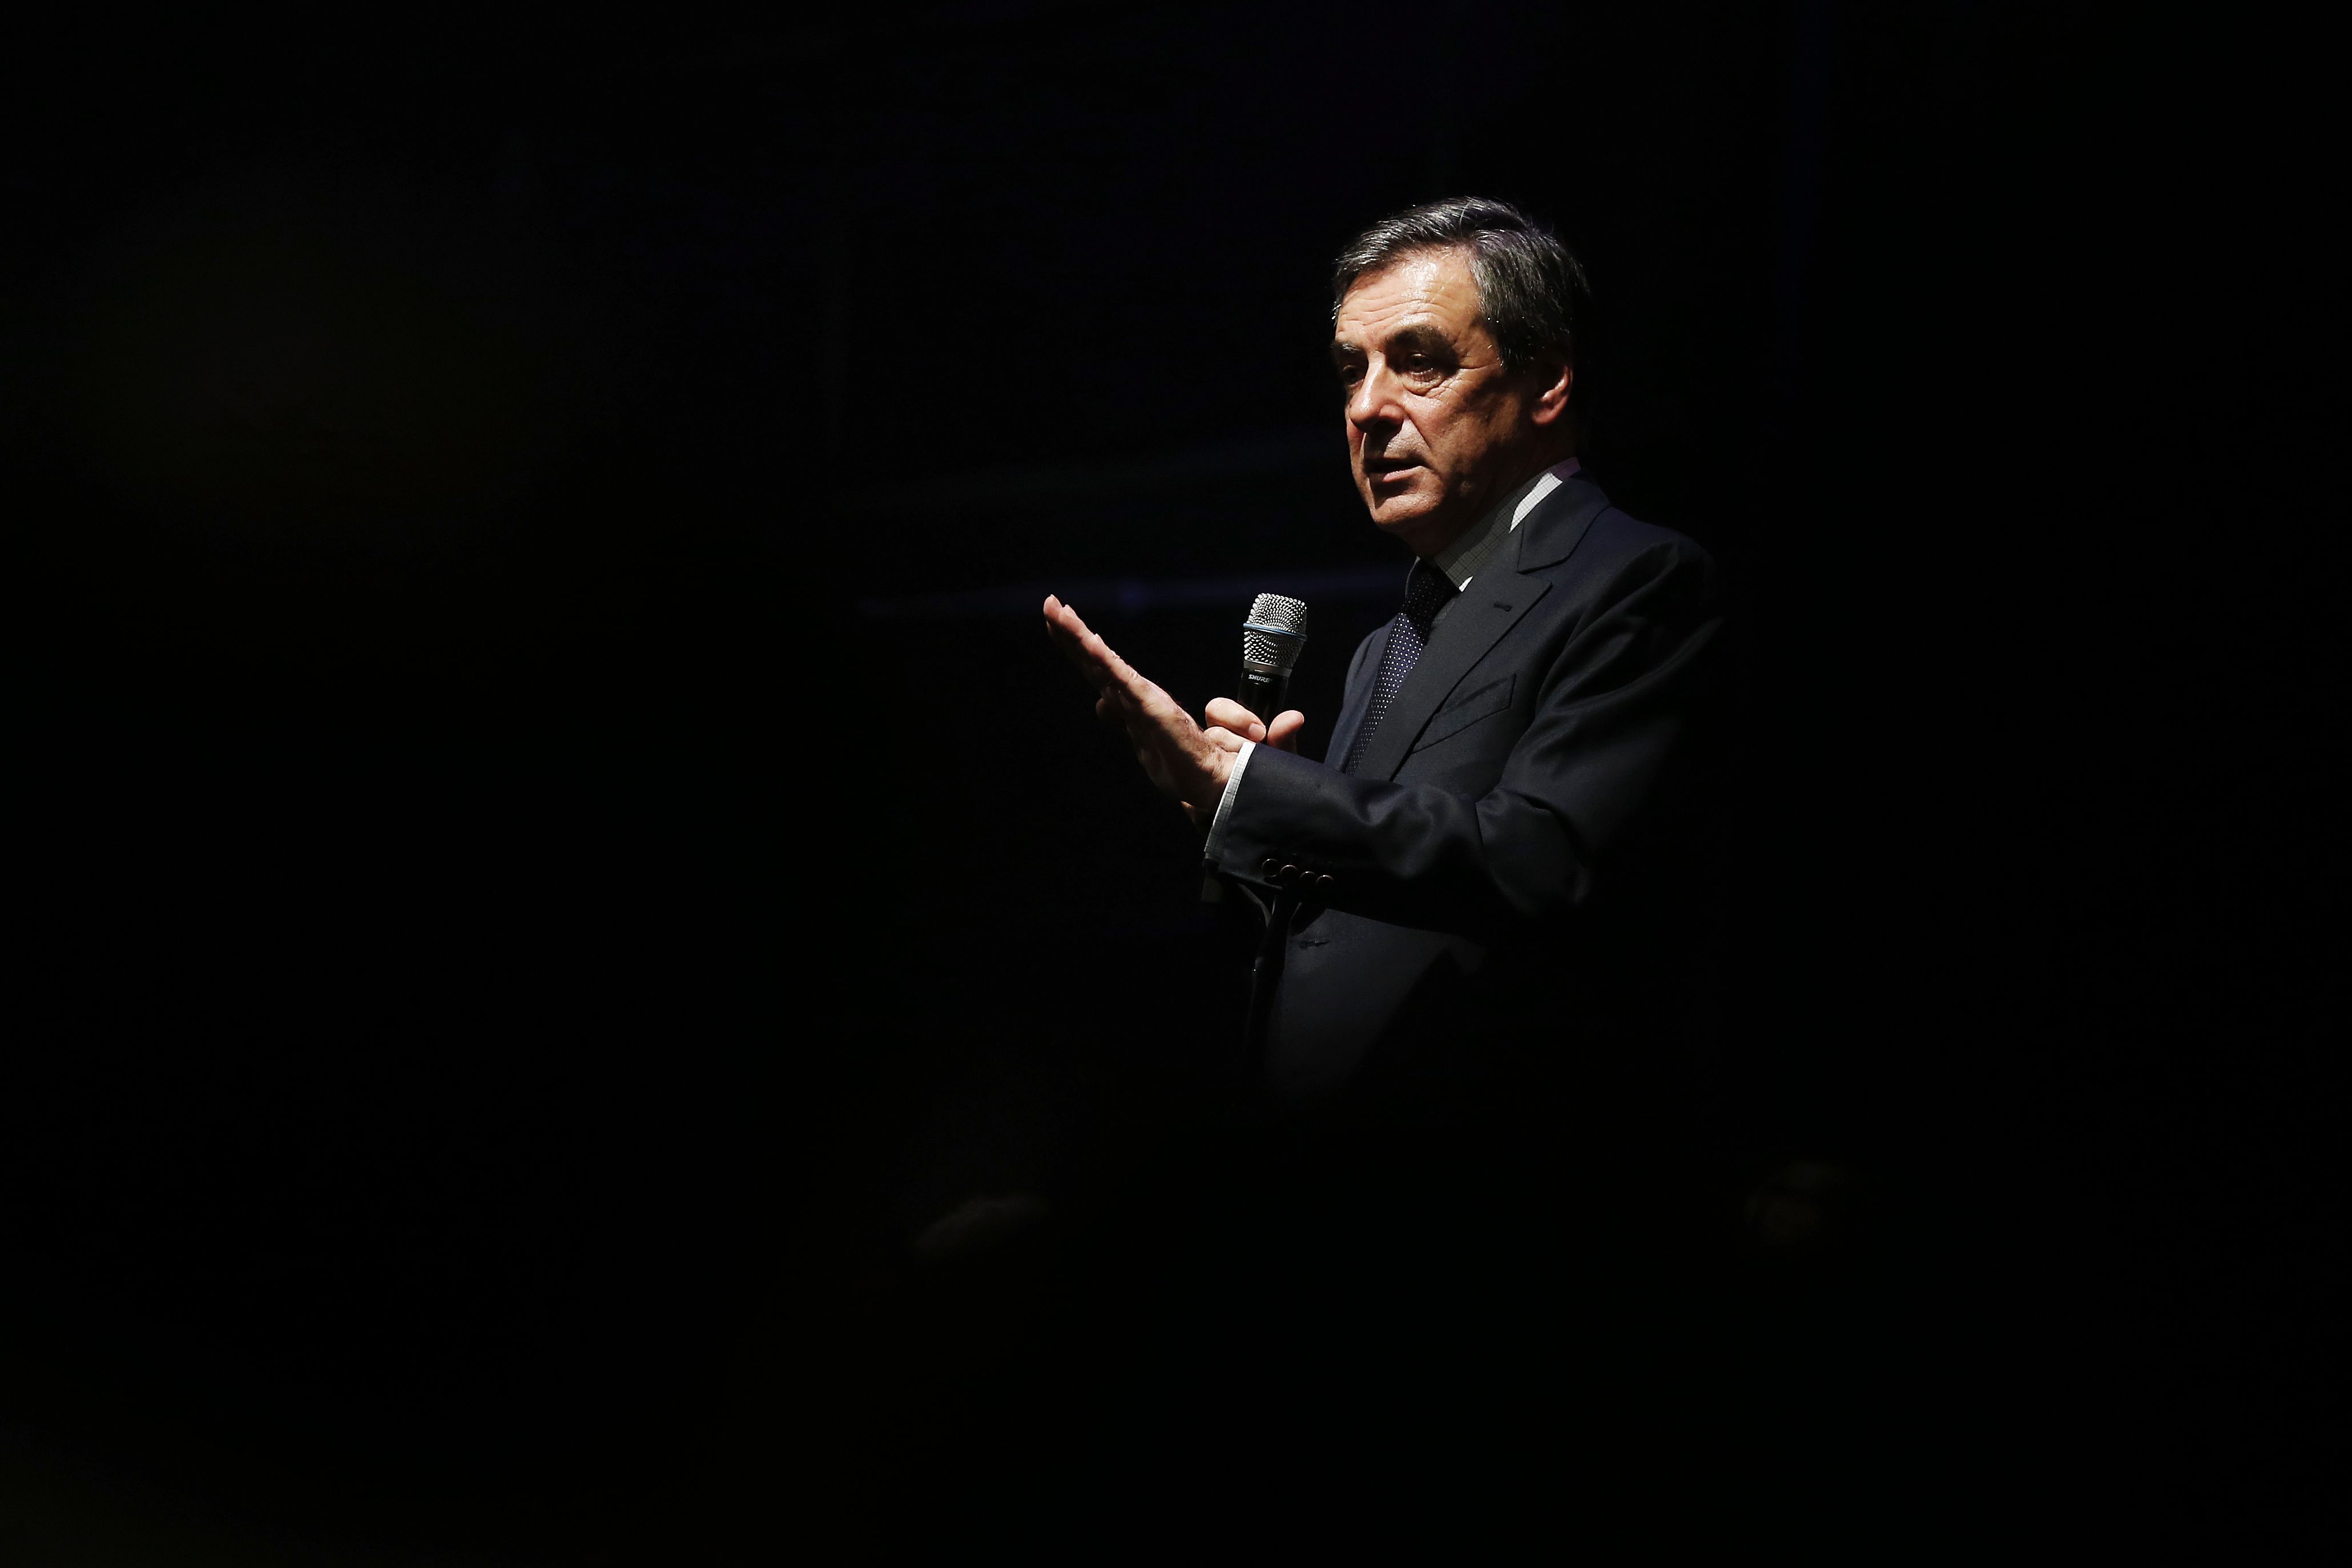 Could Francois Fillon surprise us all and win?